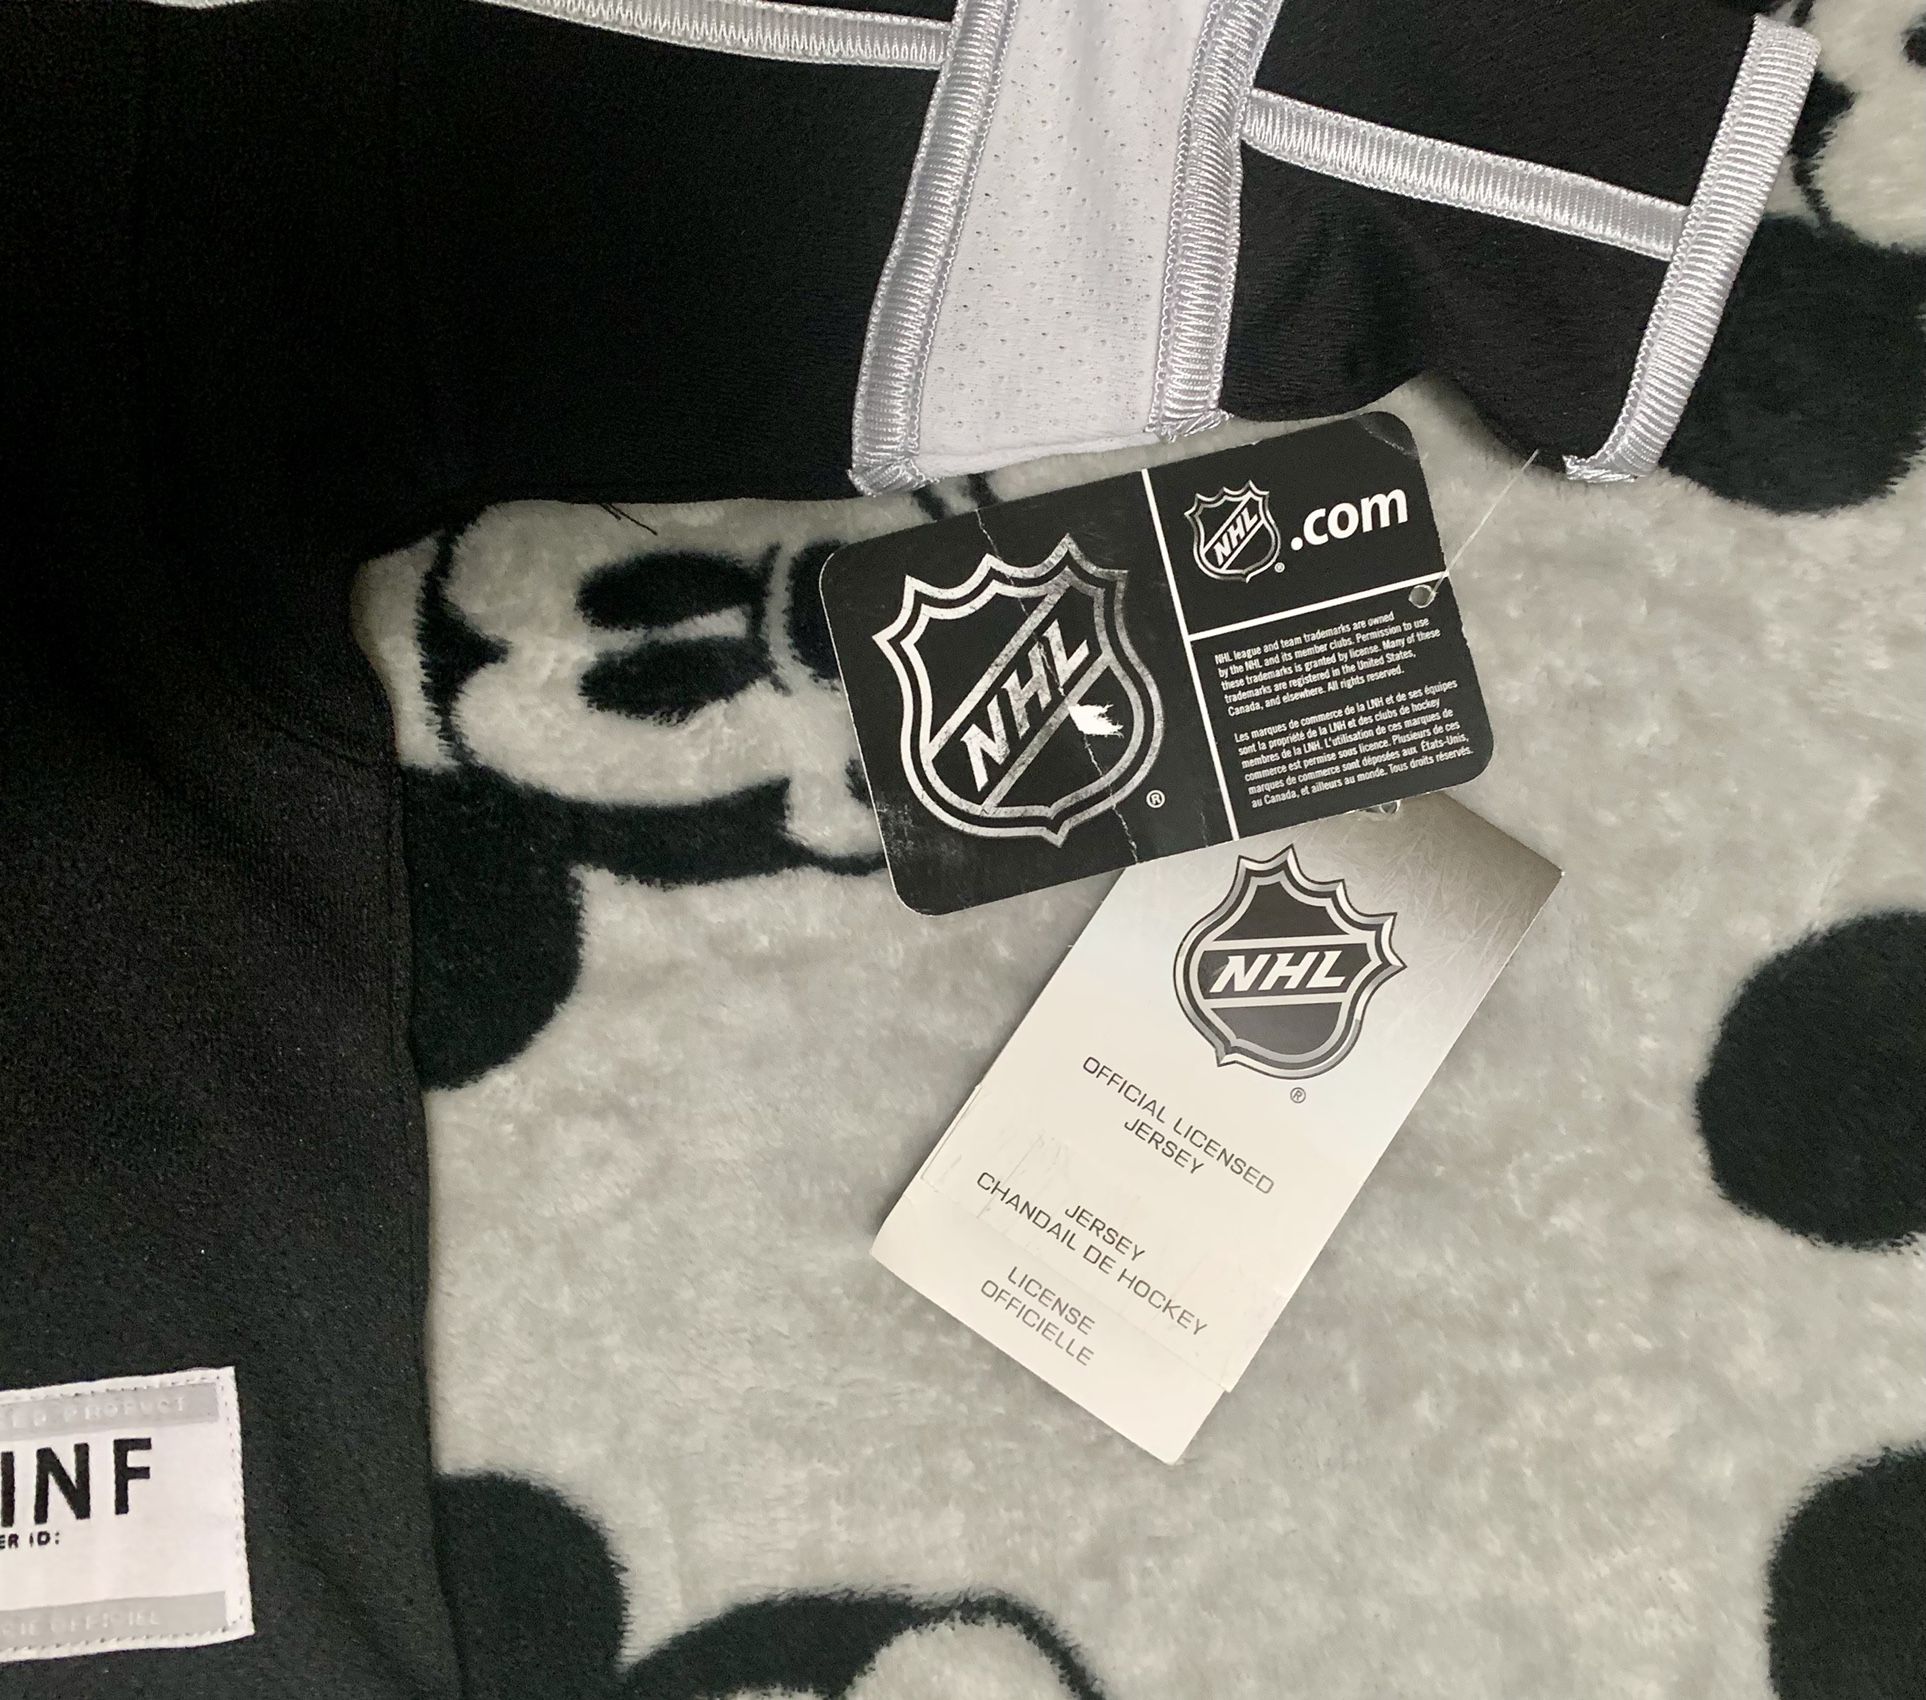 Kings Jersey for Sale in Vacaville, CA - OfferUp